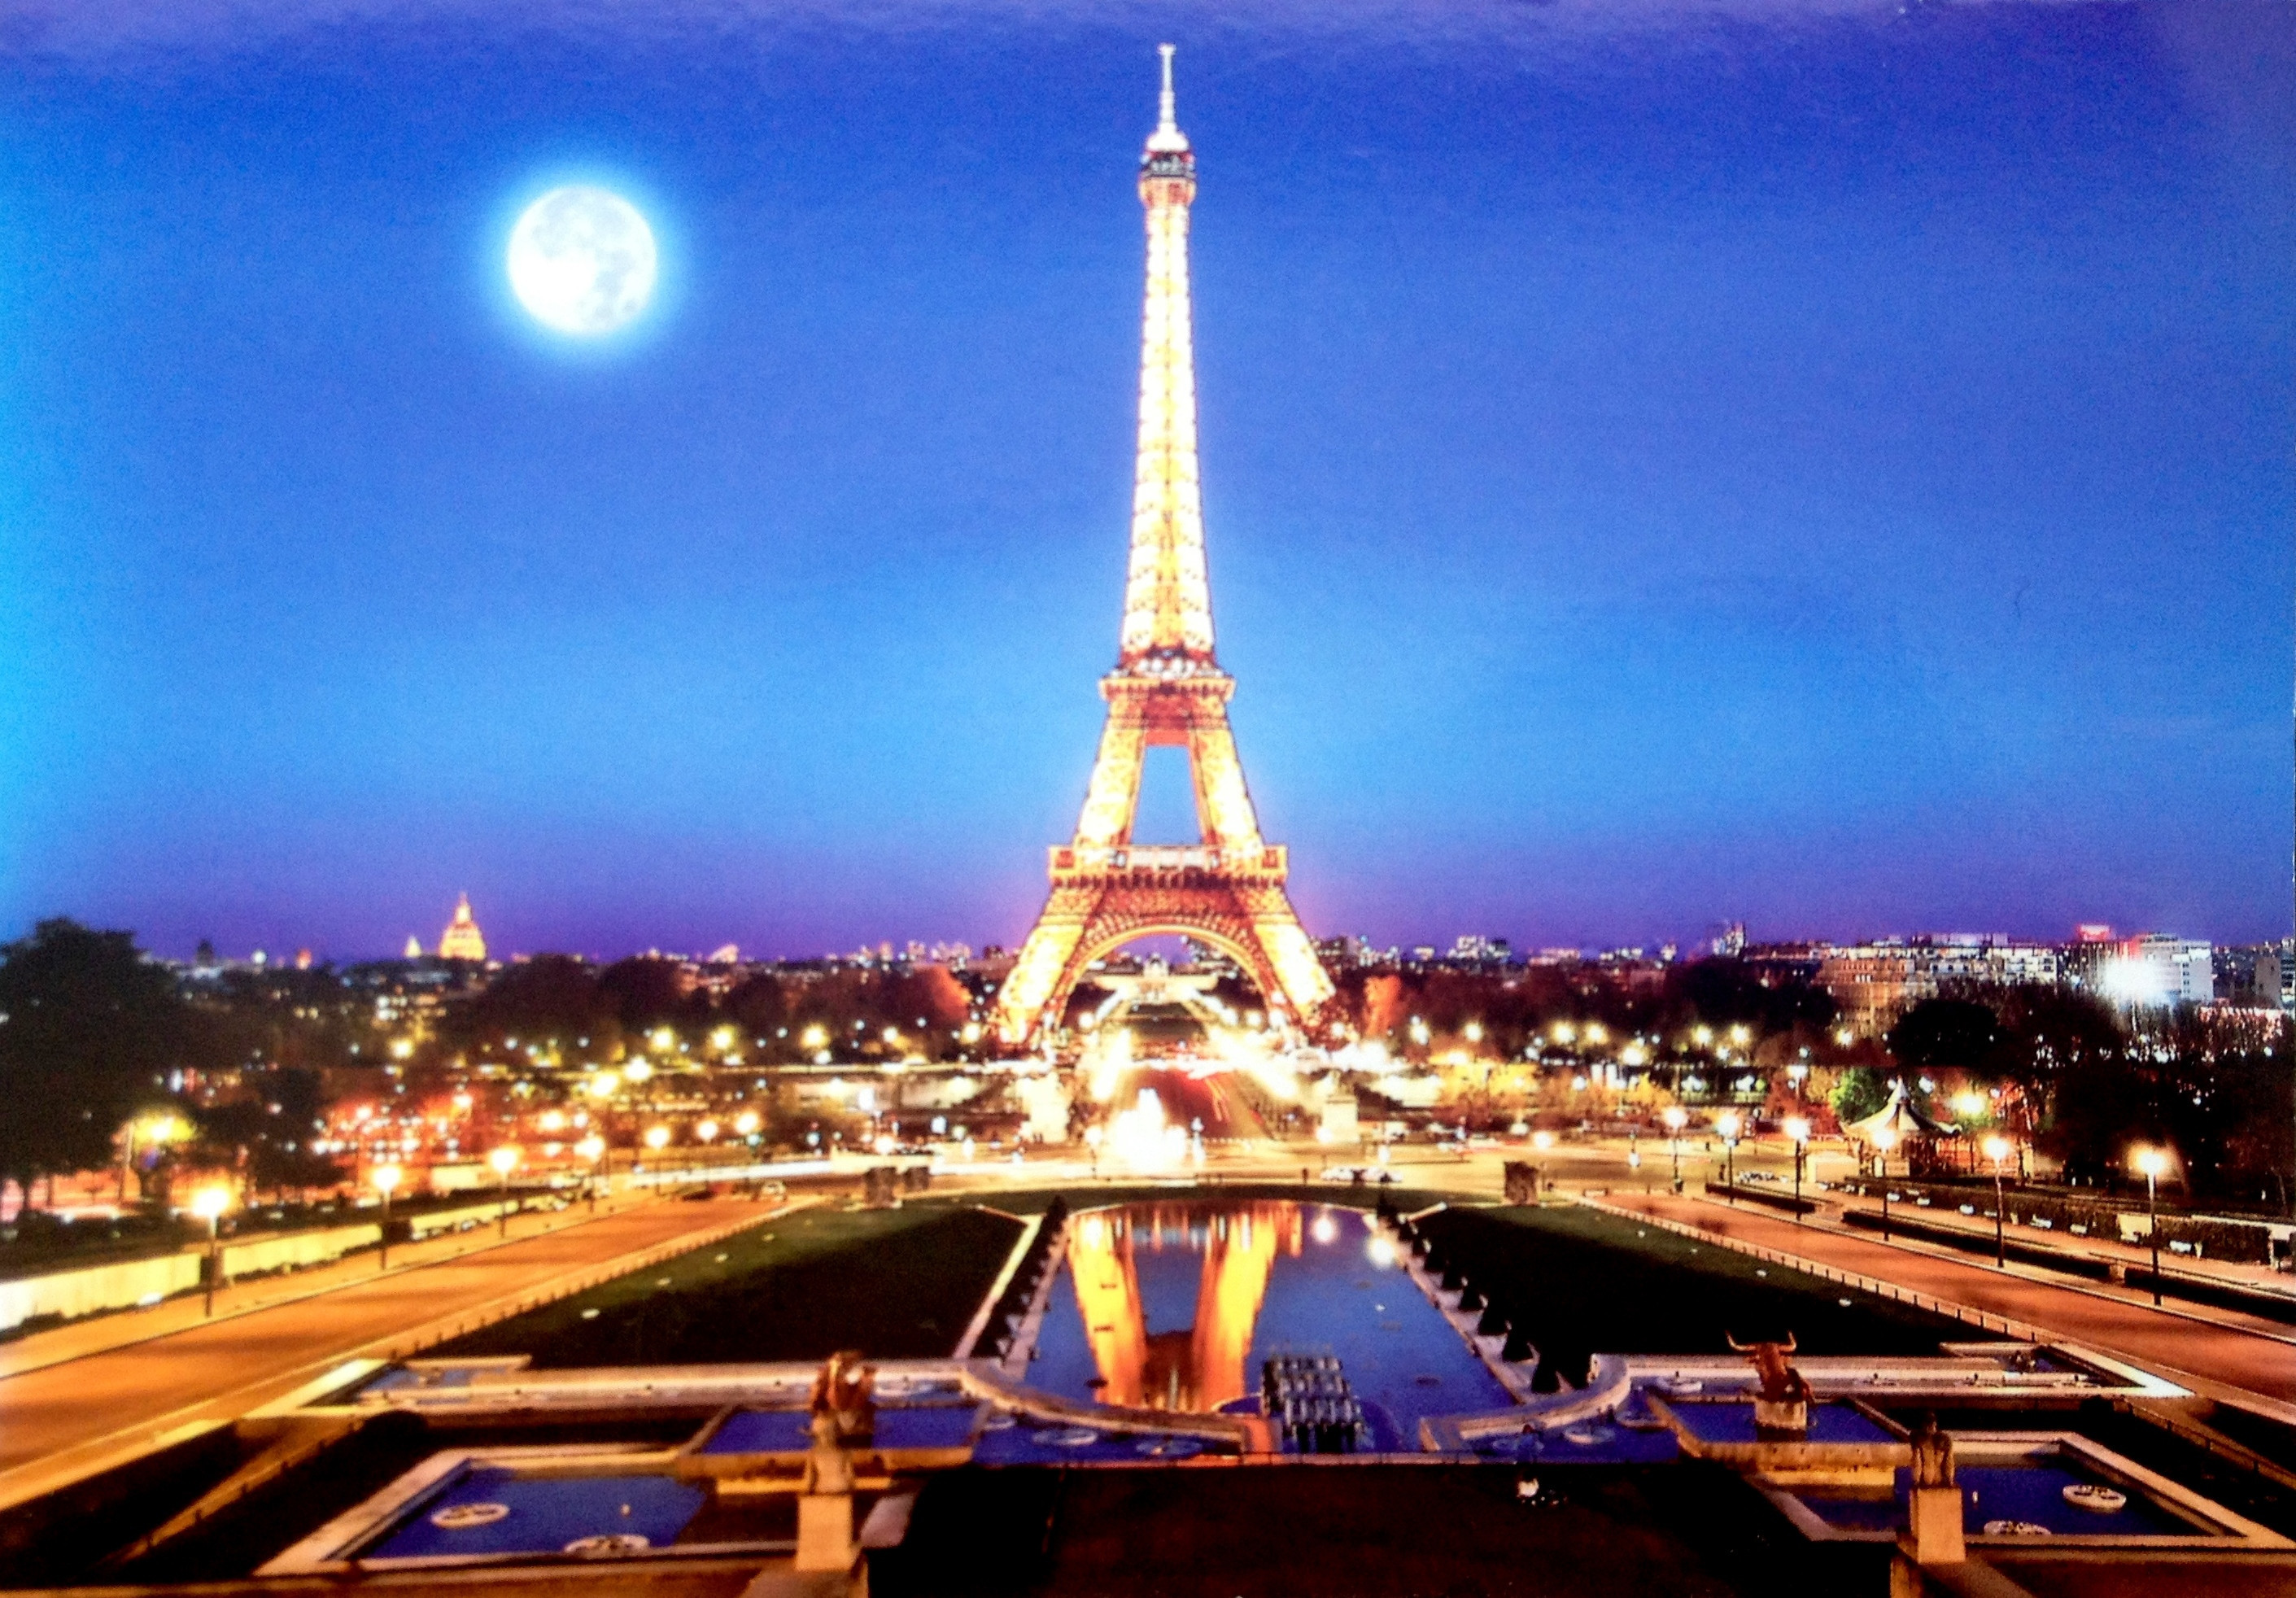 2822x1964 ... Attachment Page). This Eiffel tower at Night Paris France Wallpaper ...